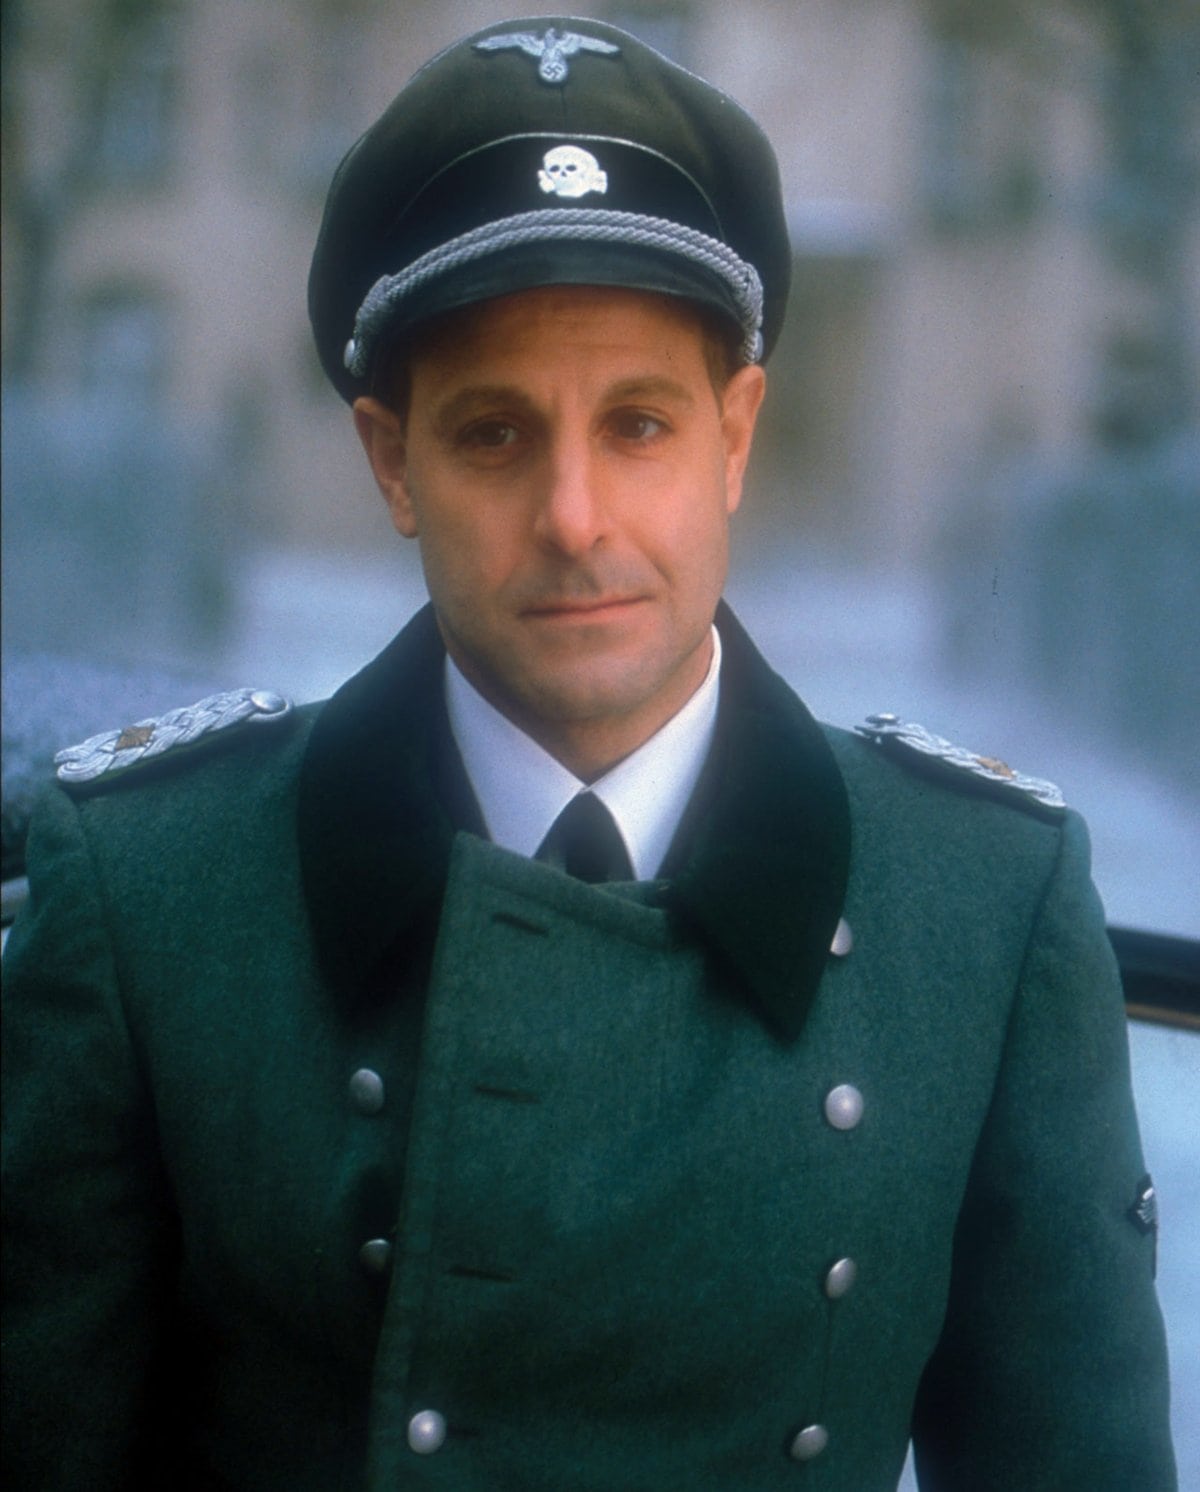 Stanley Tucci as Adolf Eichmann in the 2001 British-American made-for-television war film "Conspiracy"